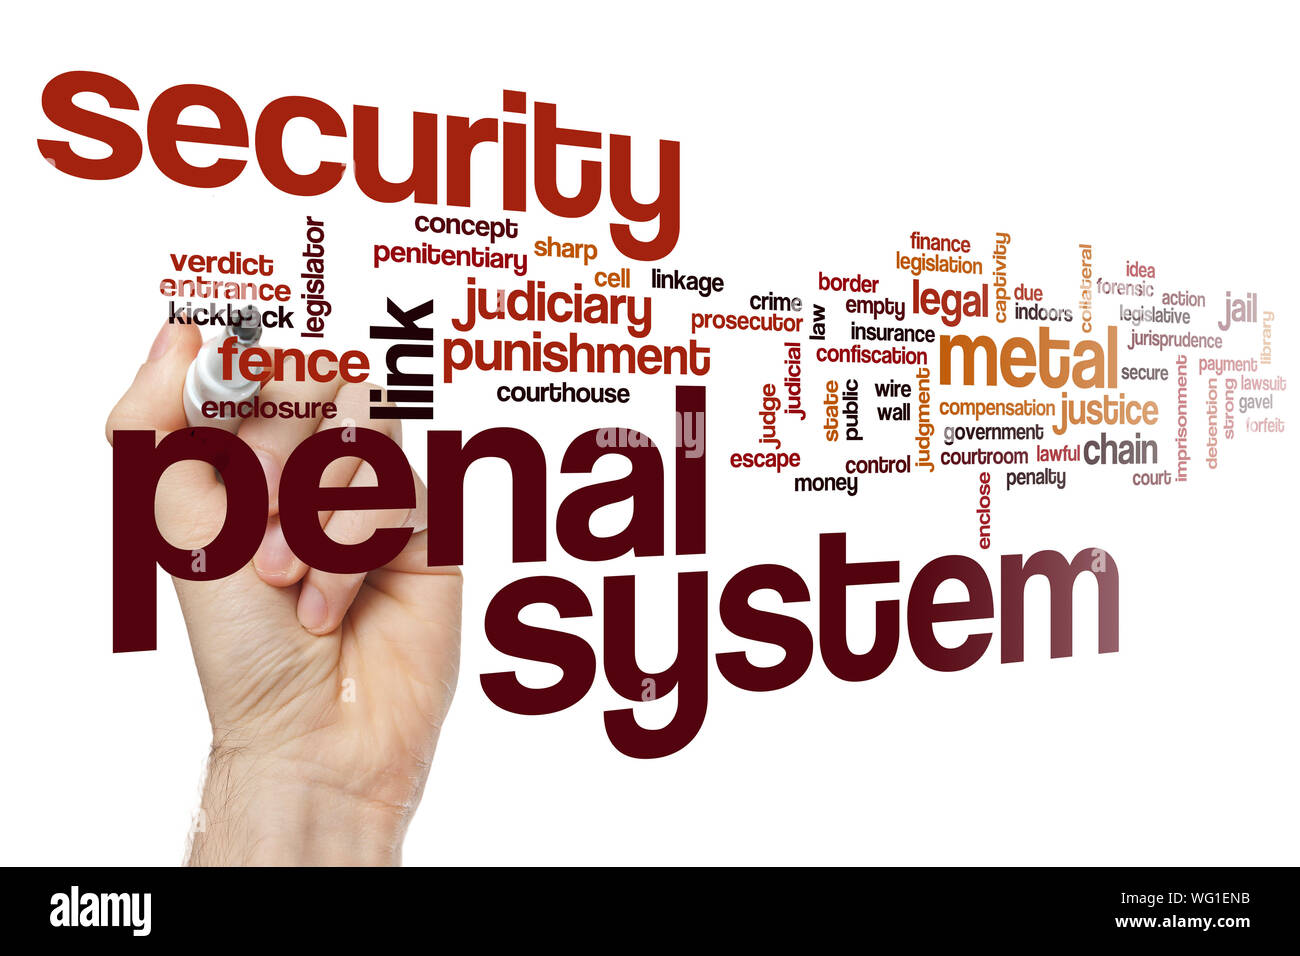 Penal system word cloud concept Stock Photo